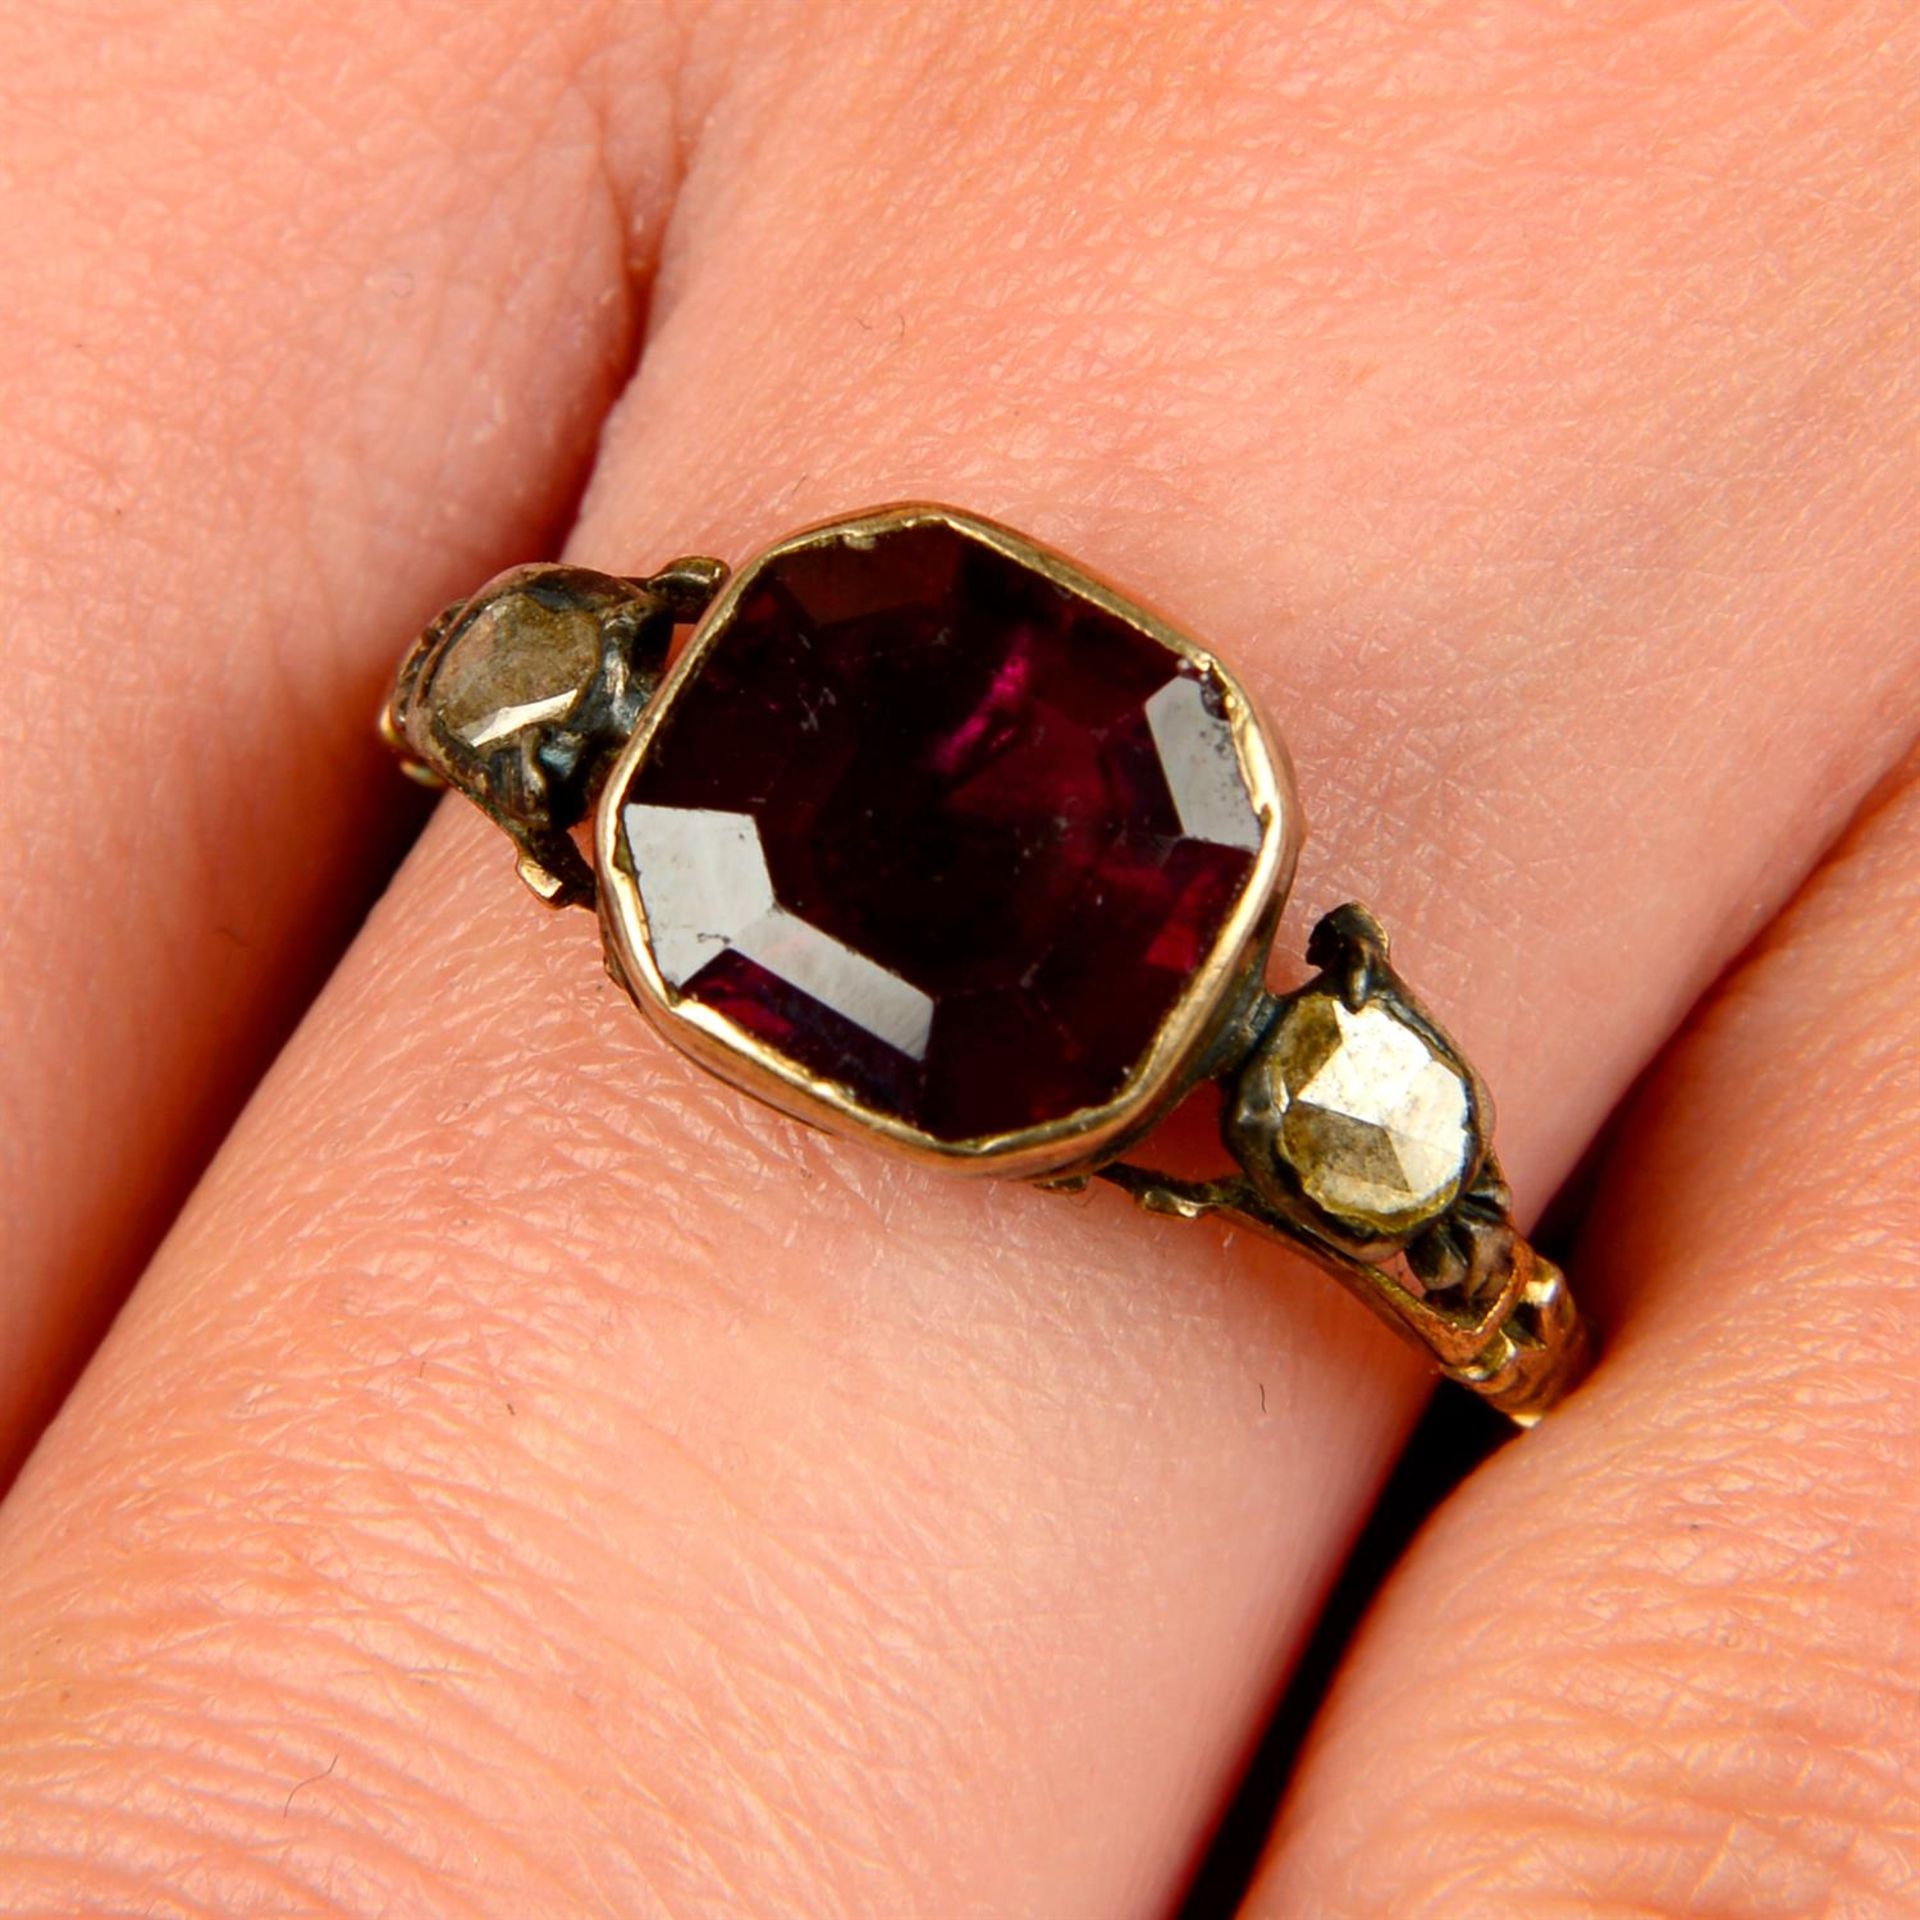 A Georgian silver and gold, foil-back garnet ring, with rose-cut diamond shoulders.